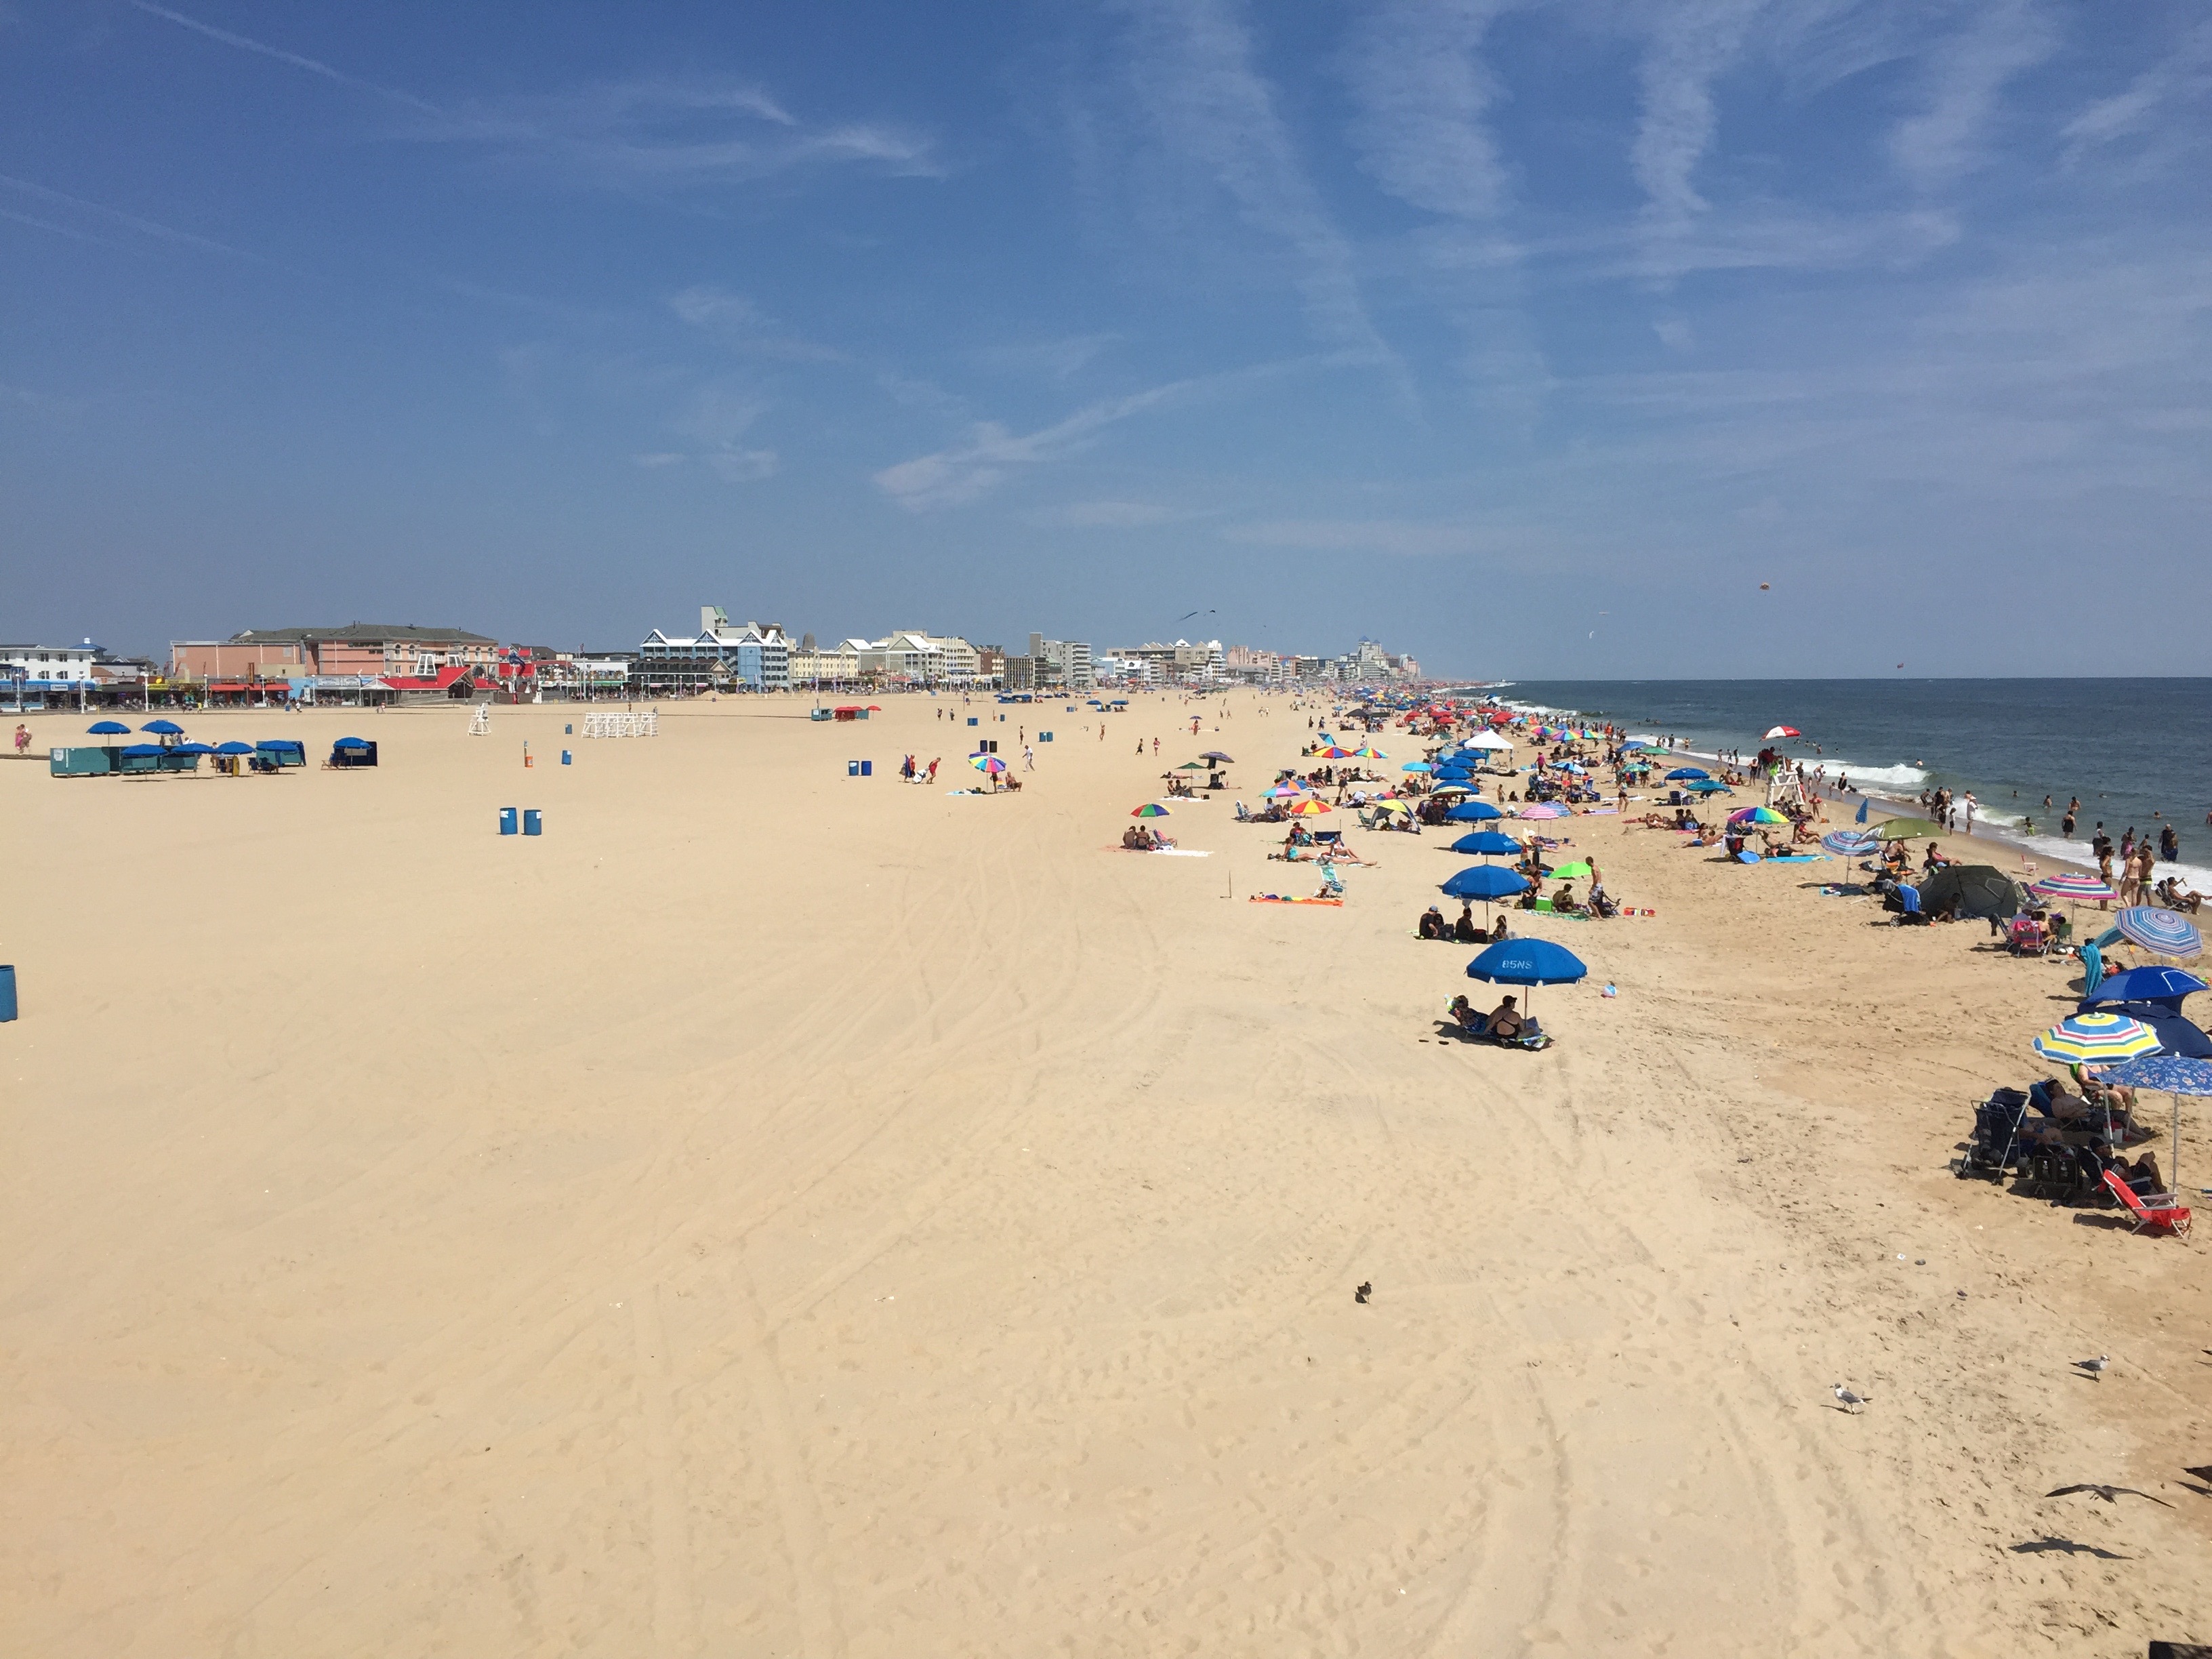 Beach and hotels of Ocean City